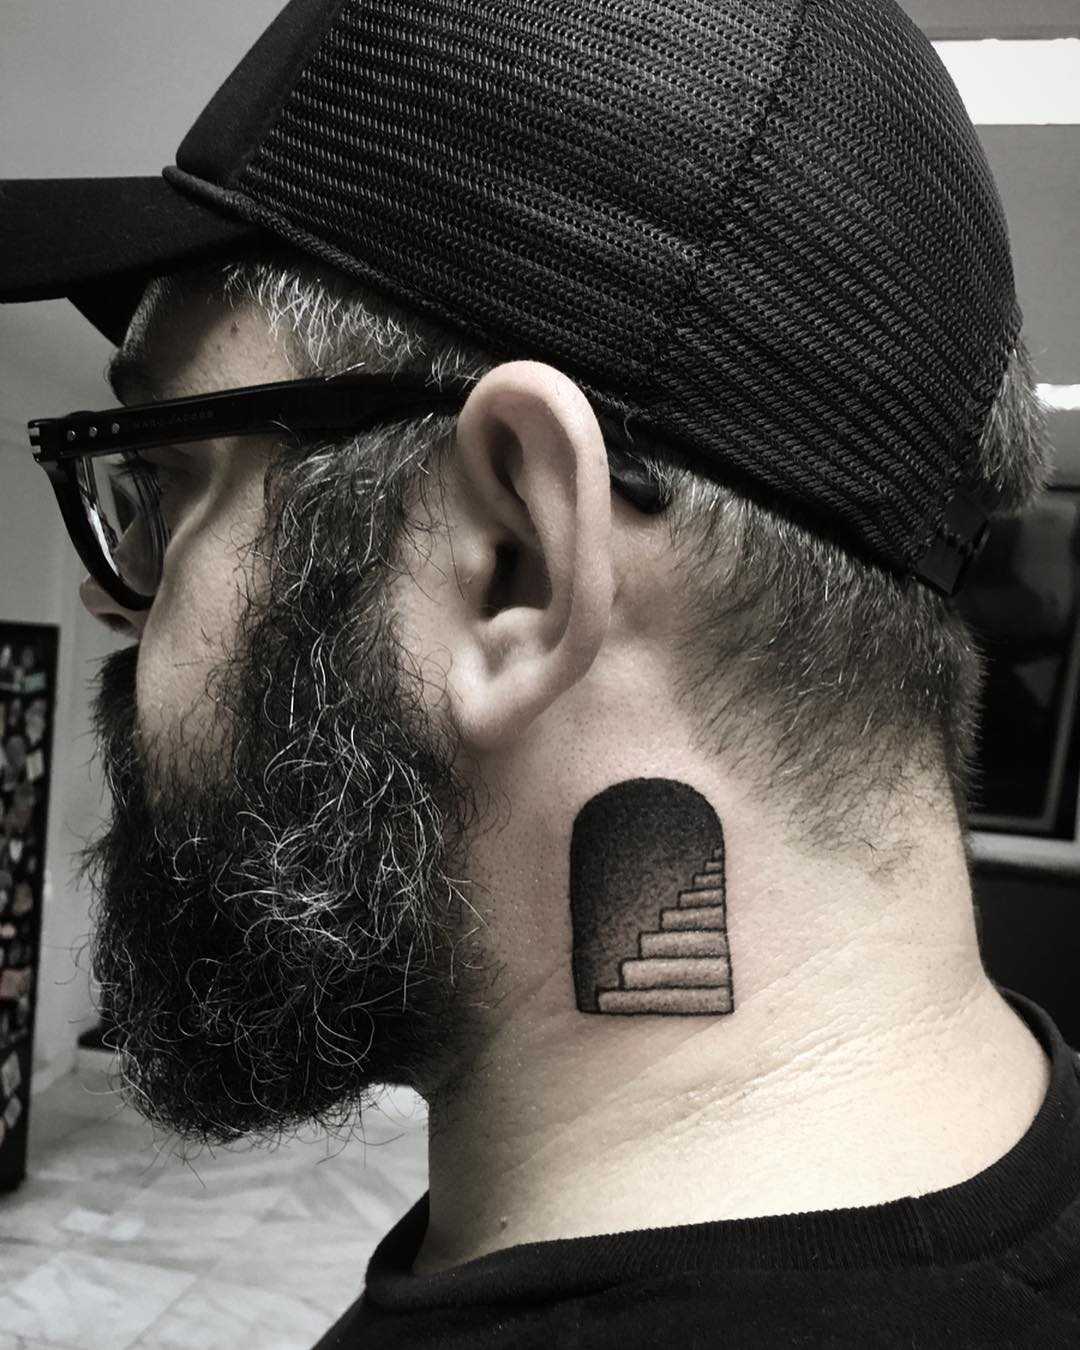 Stairway tattoo on the neck